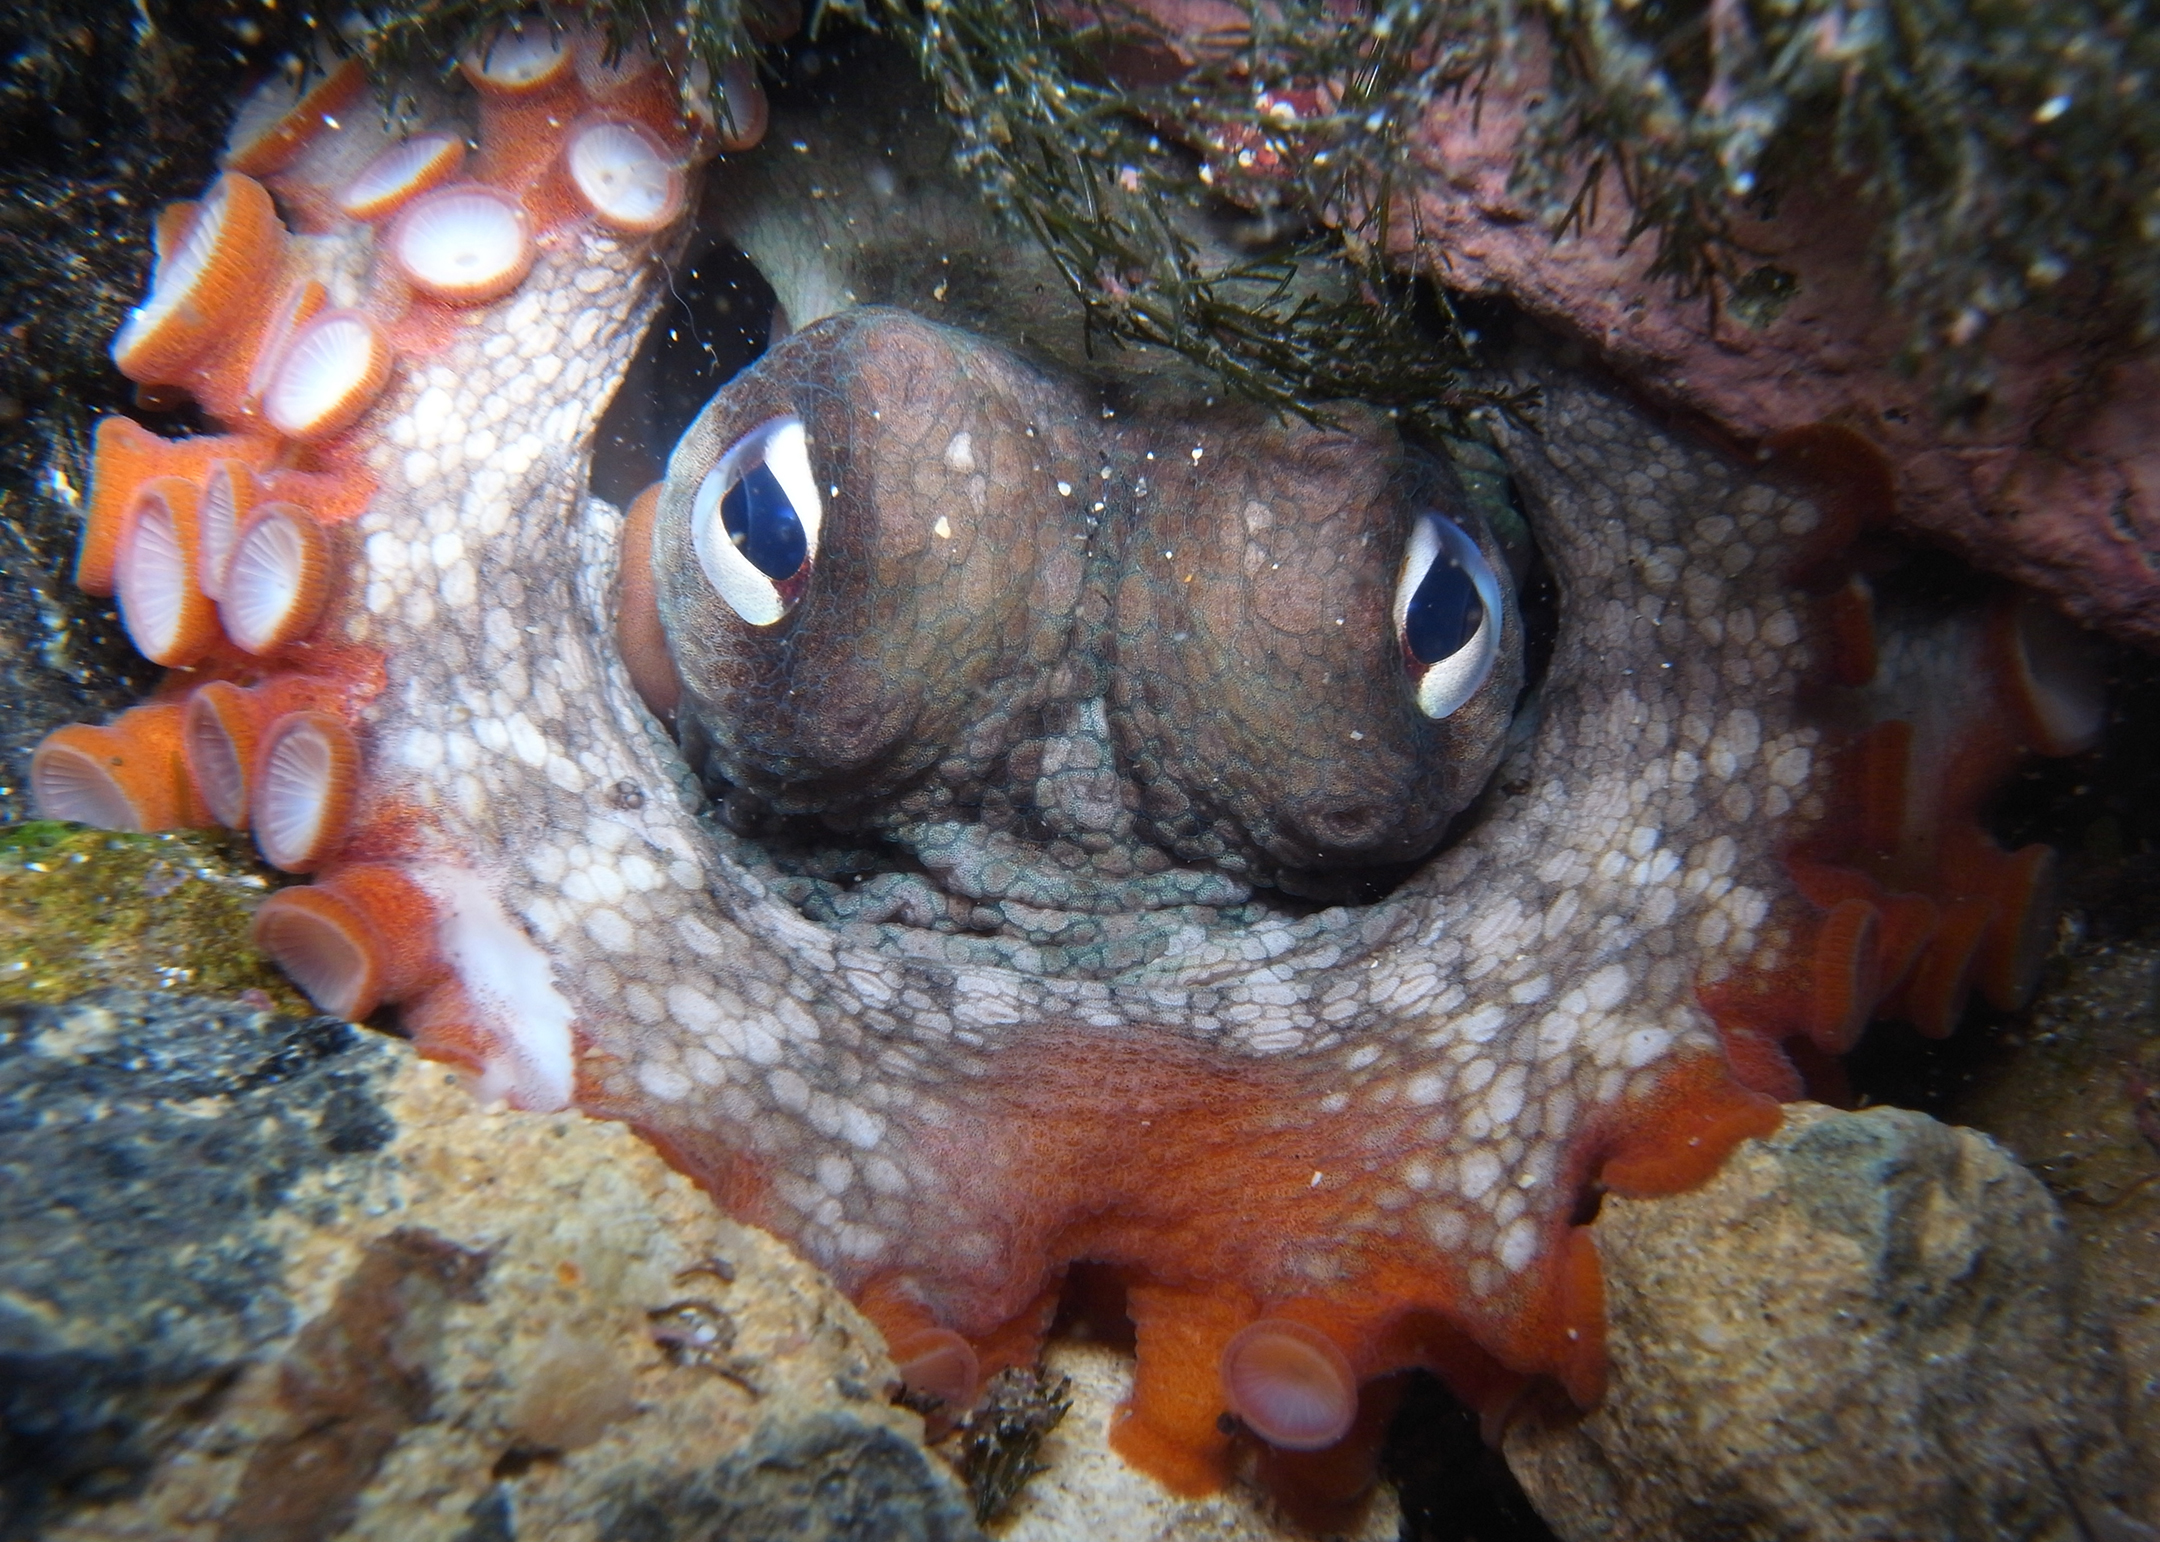 Close up of a gloomy octopus hiding in an underwater hole